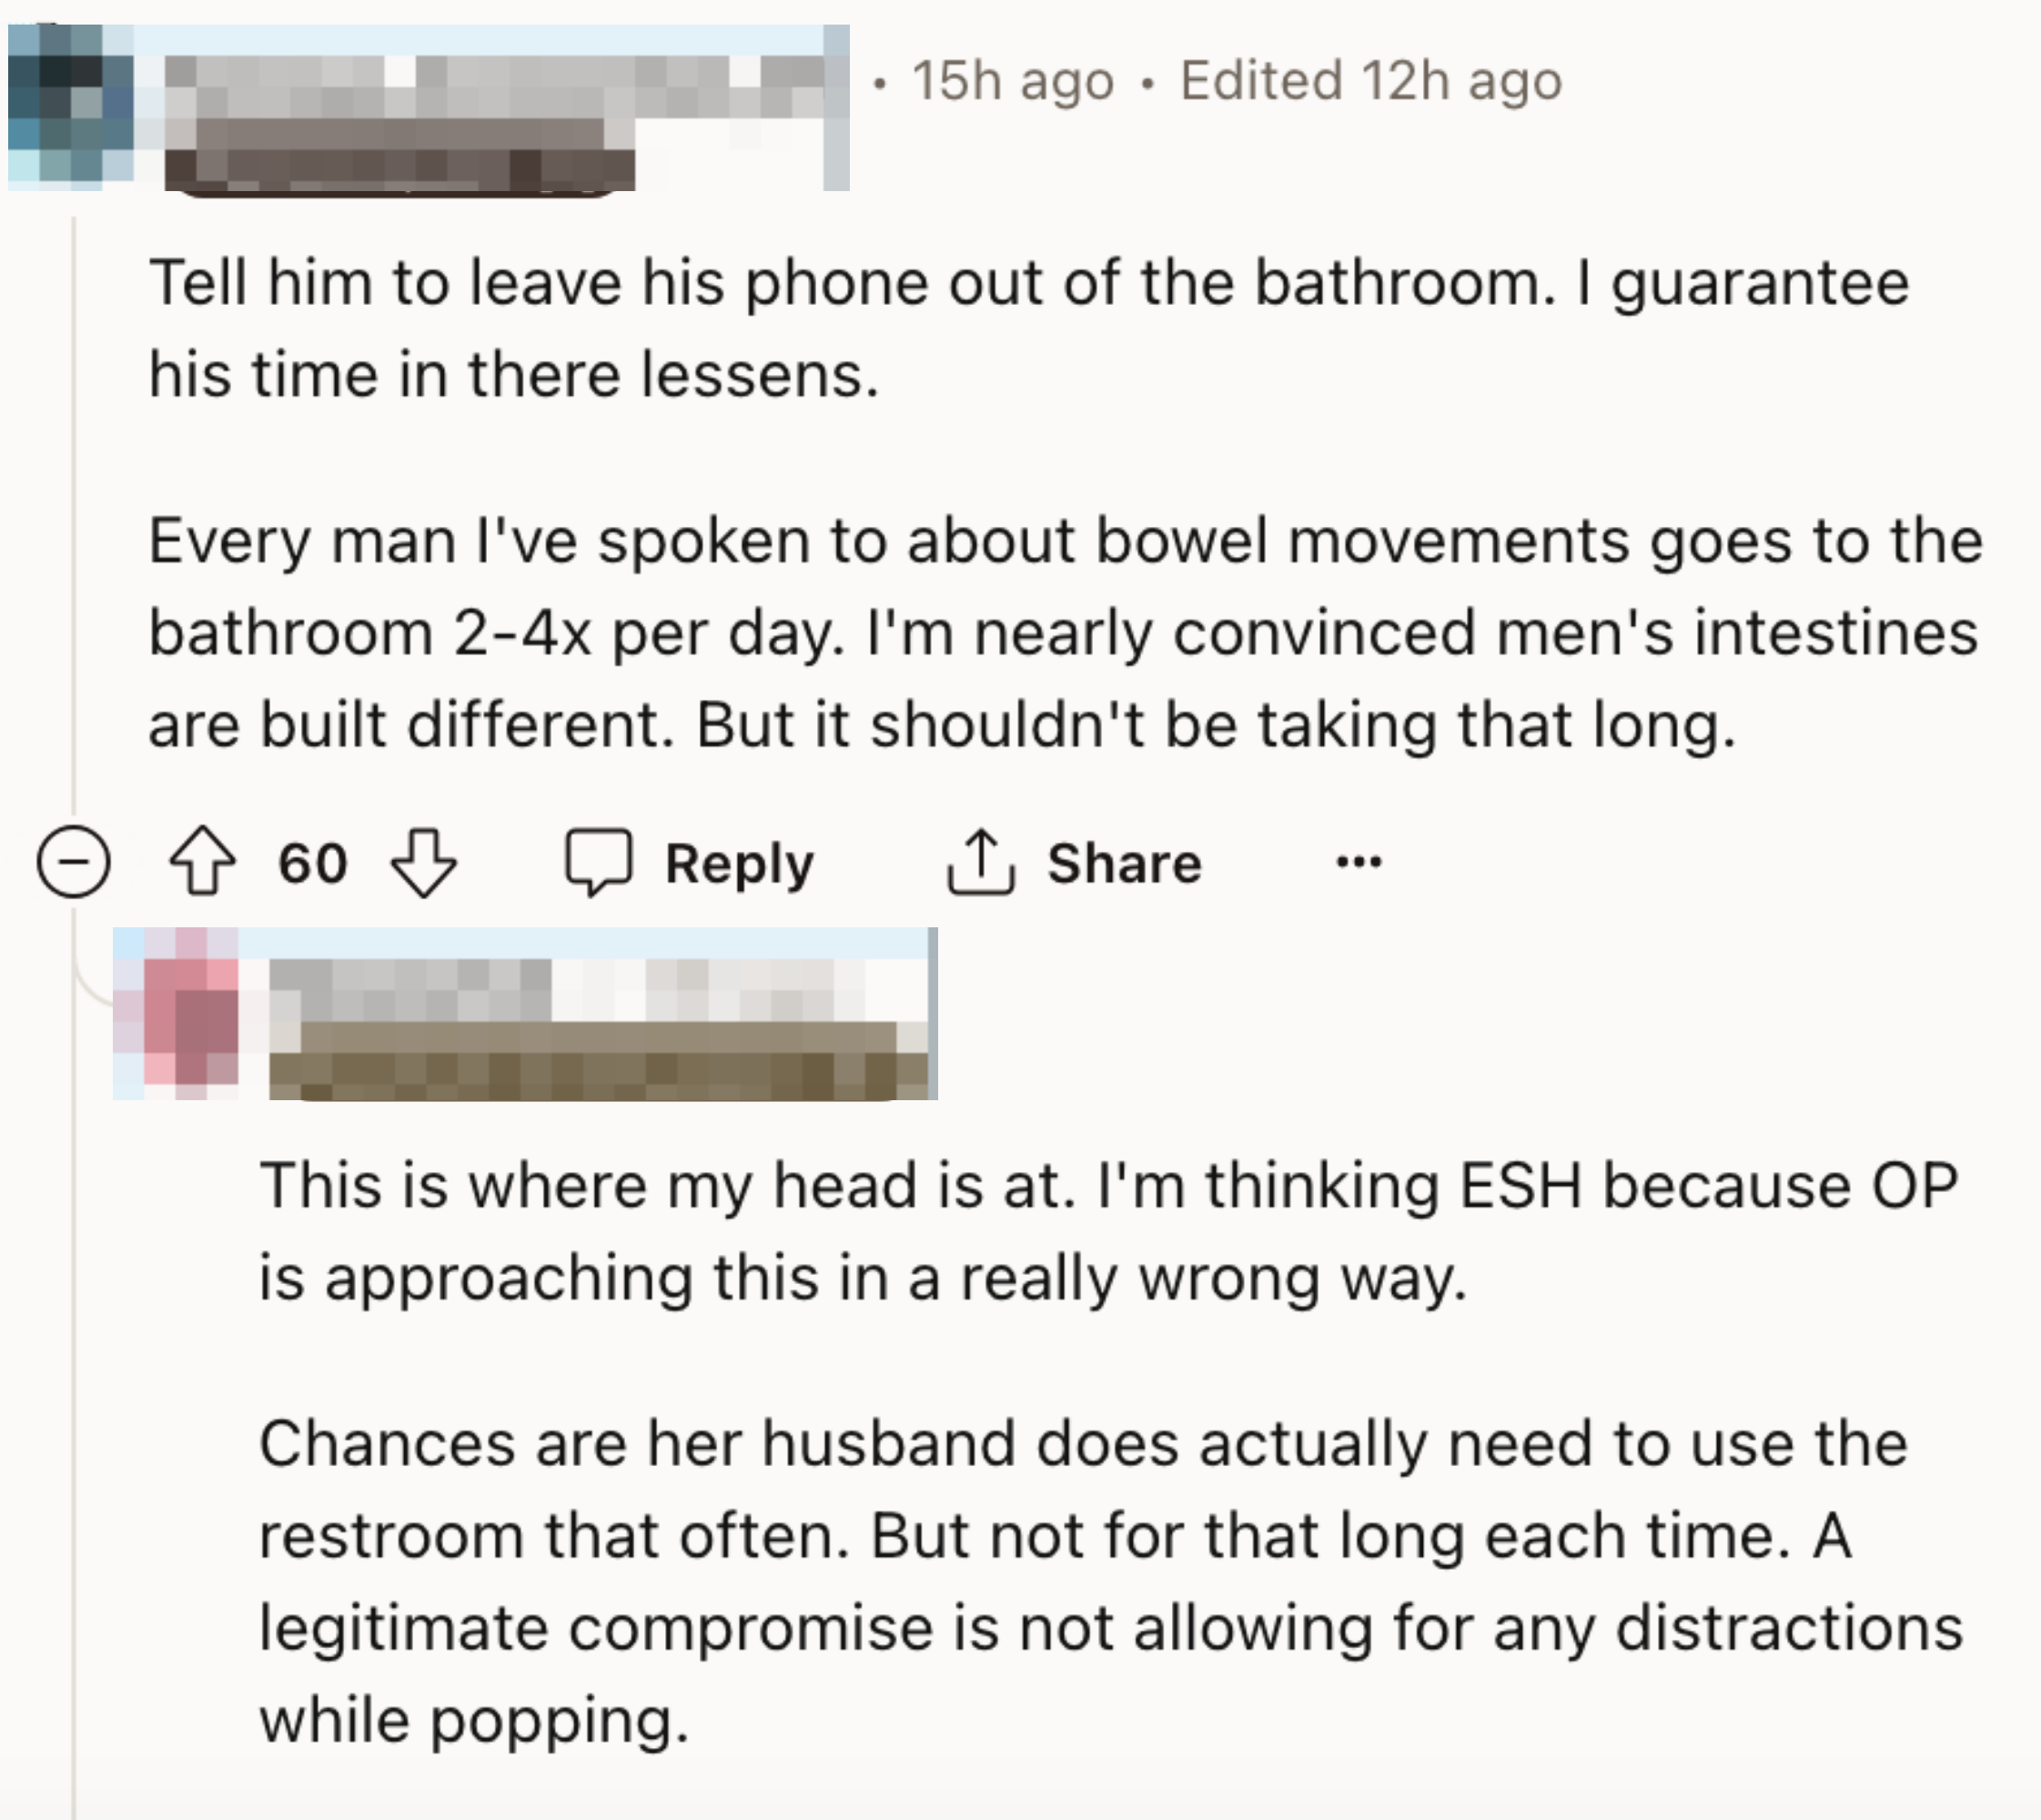 Commenters arguing that the husband is probably taking longer than needed, but the OP approached it the wrong way